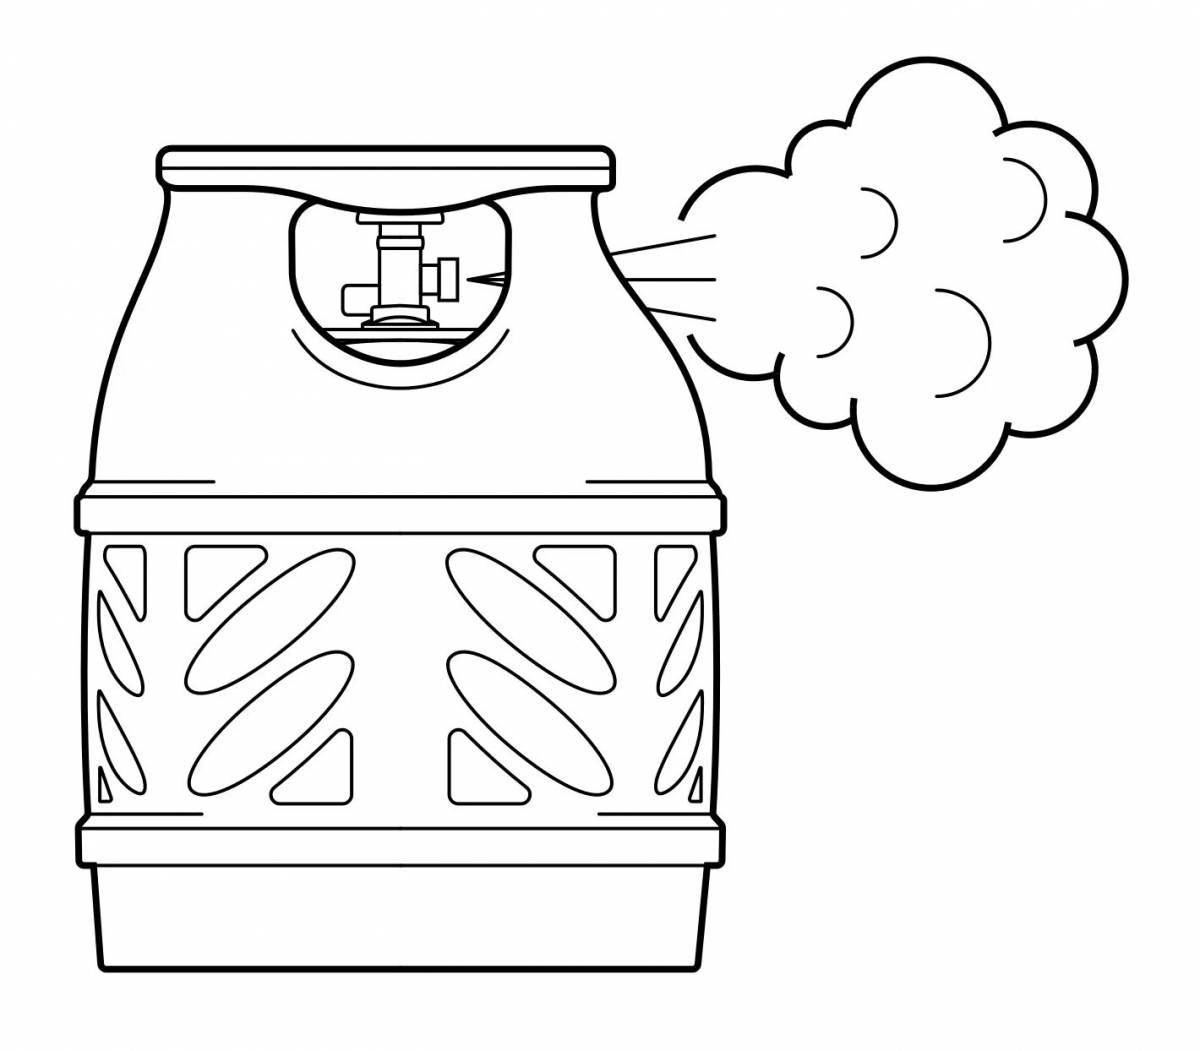 Coloring page unusual gas cylinders